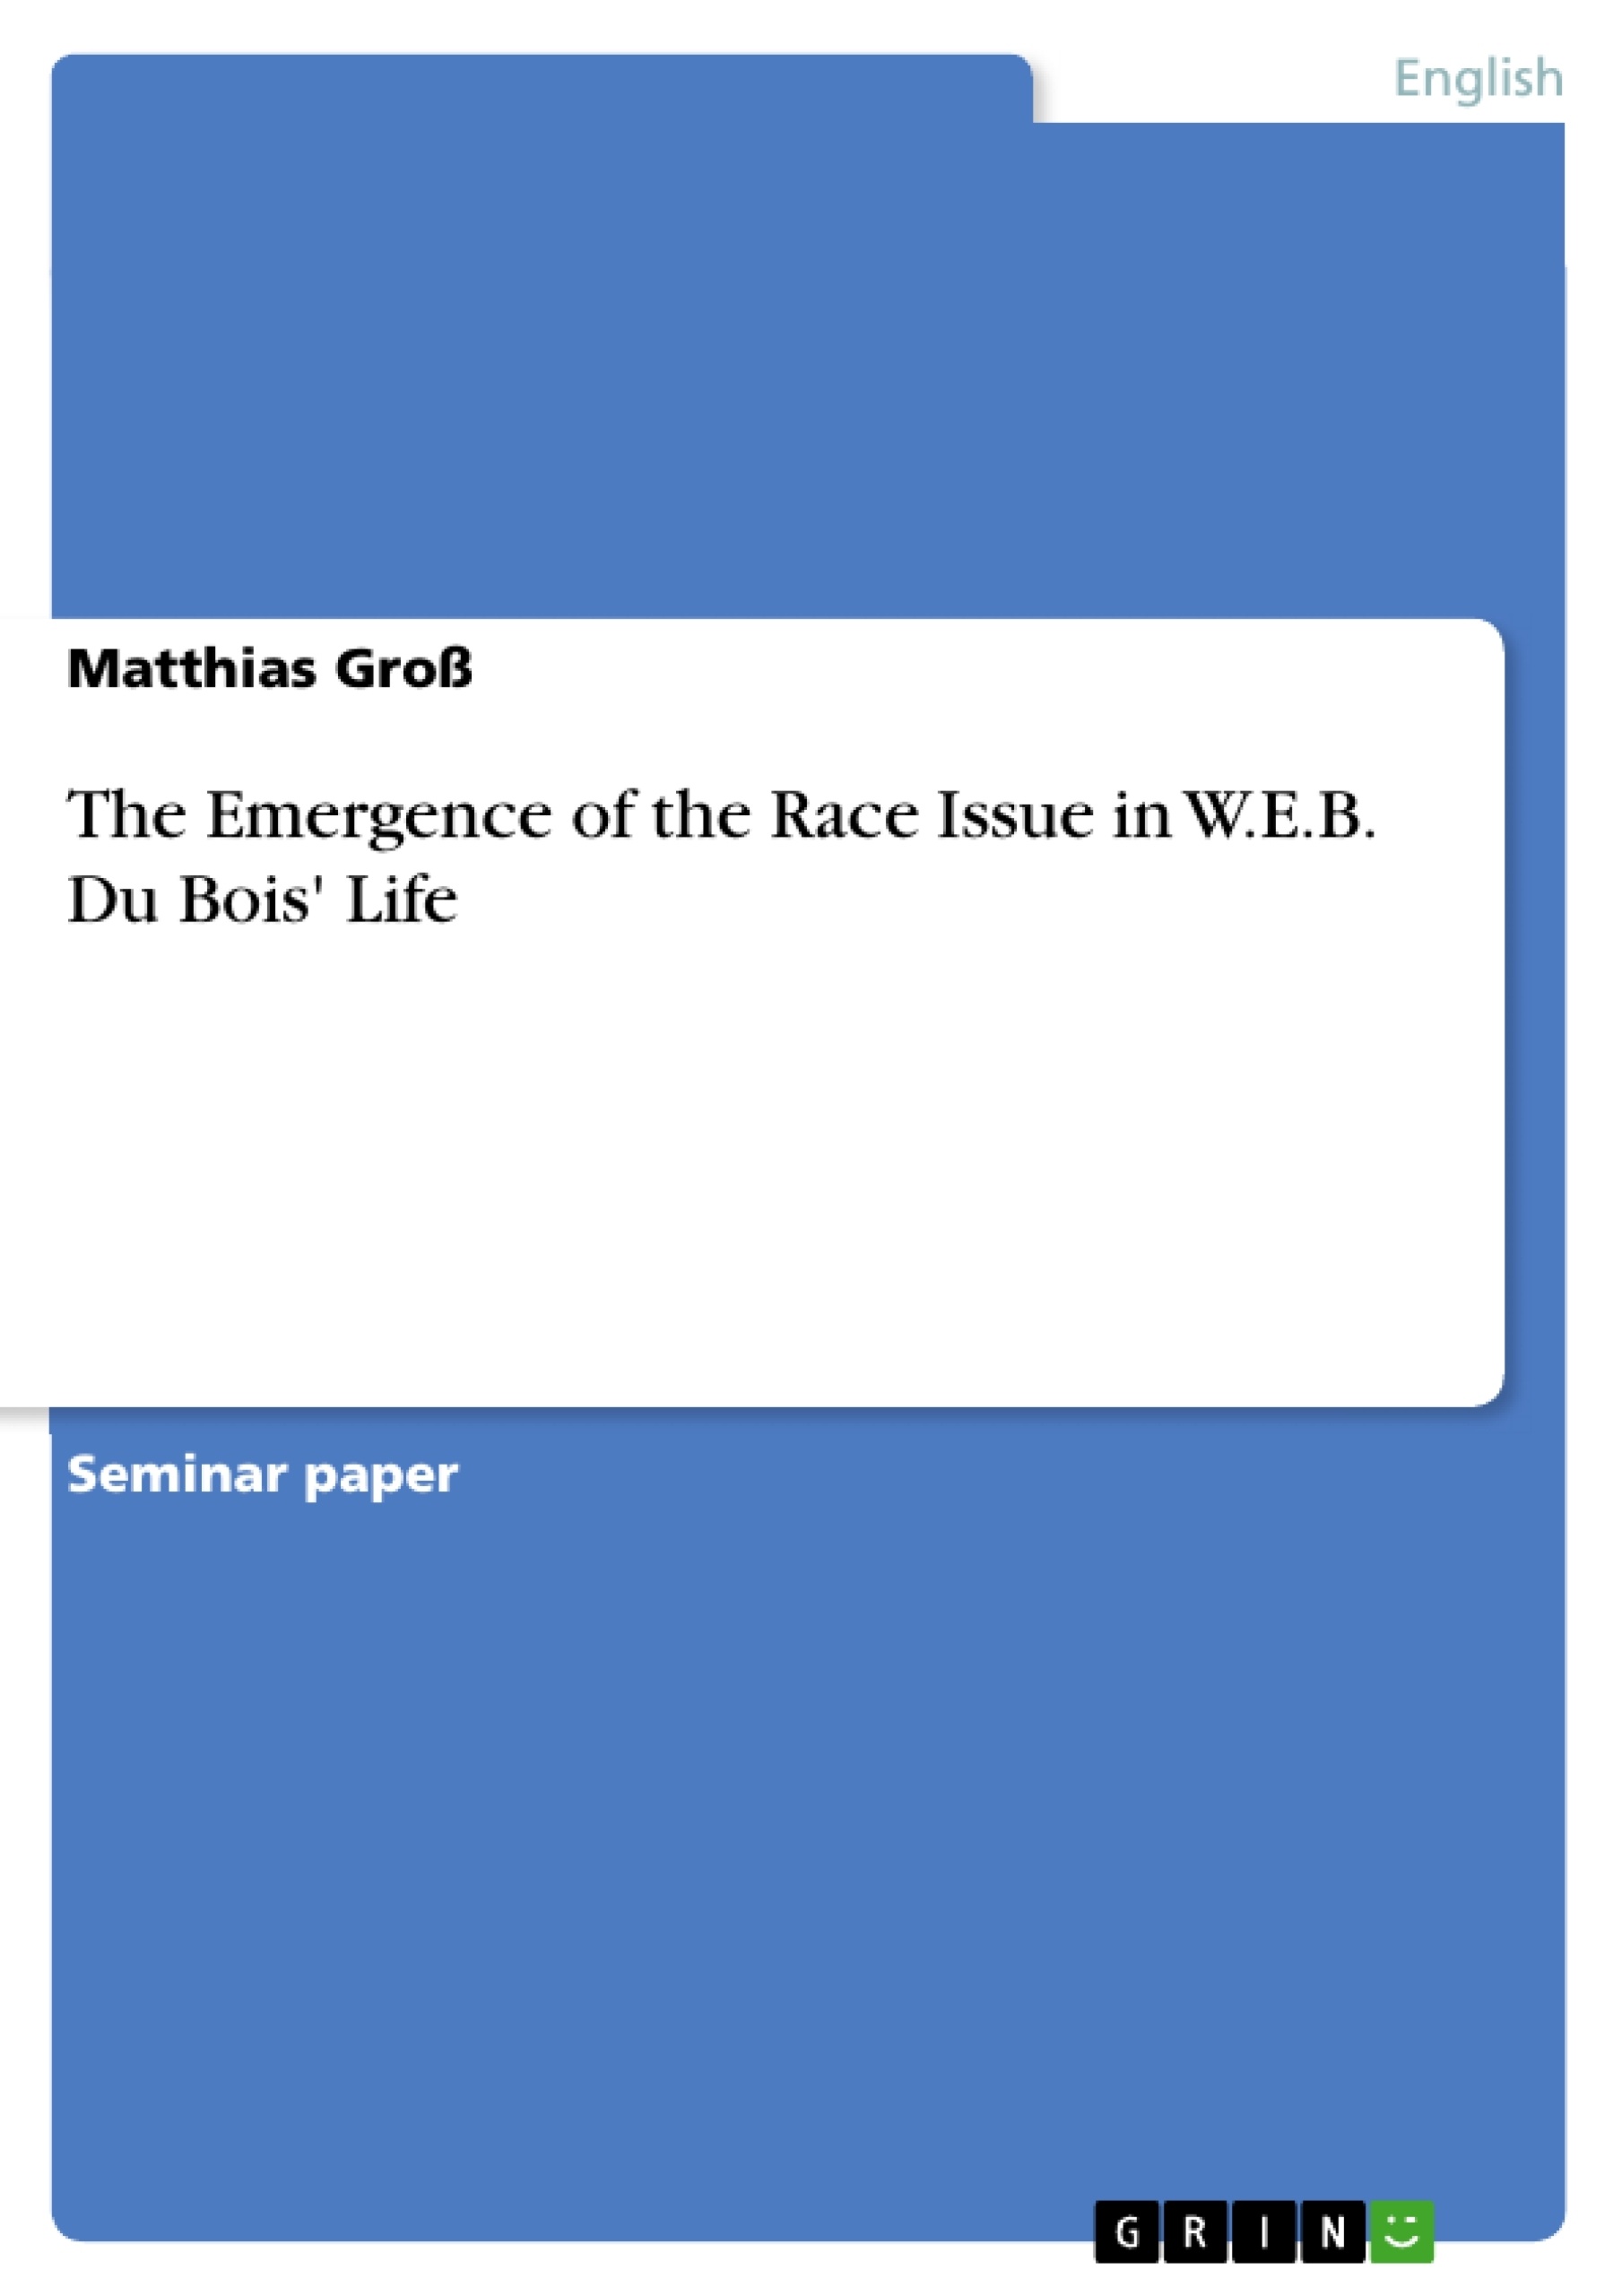 Título: The Emergence of the Race Issue in W.E.B. Du Bois' Life